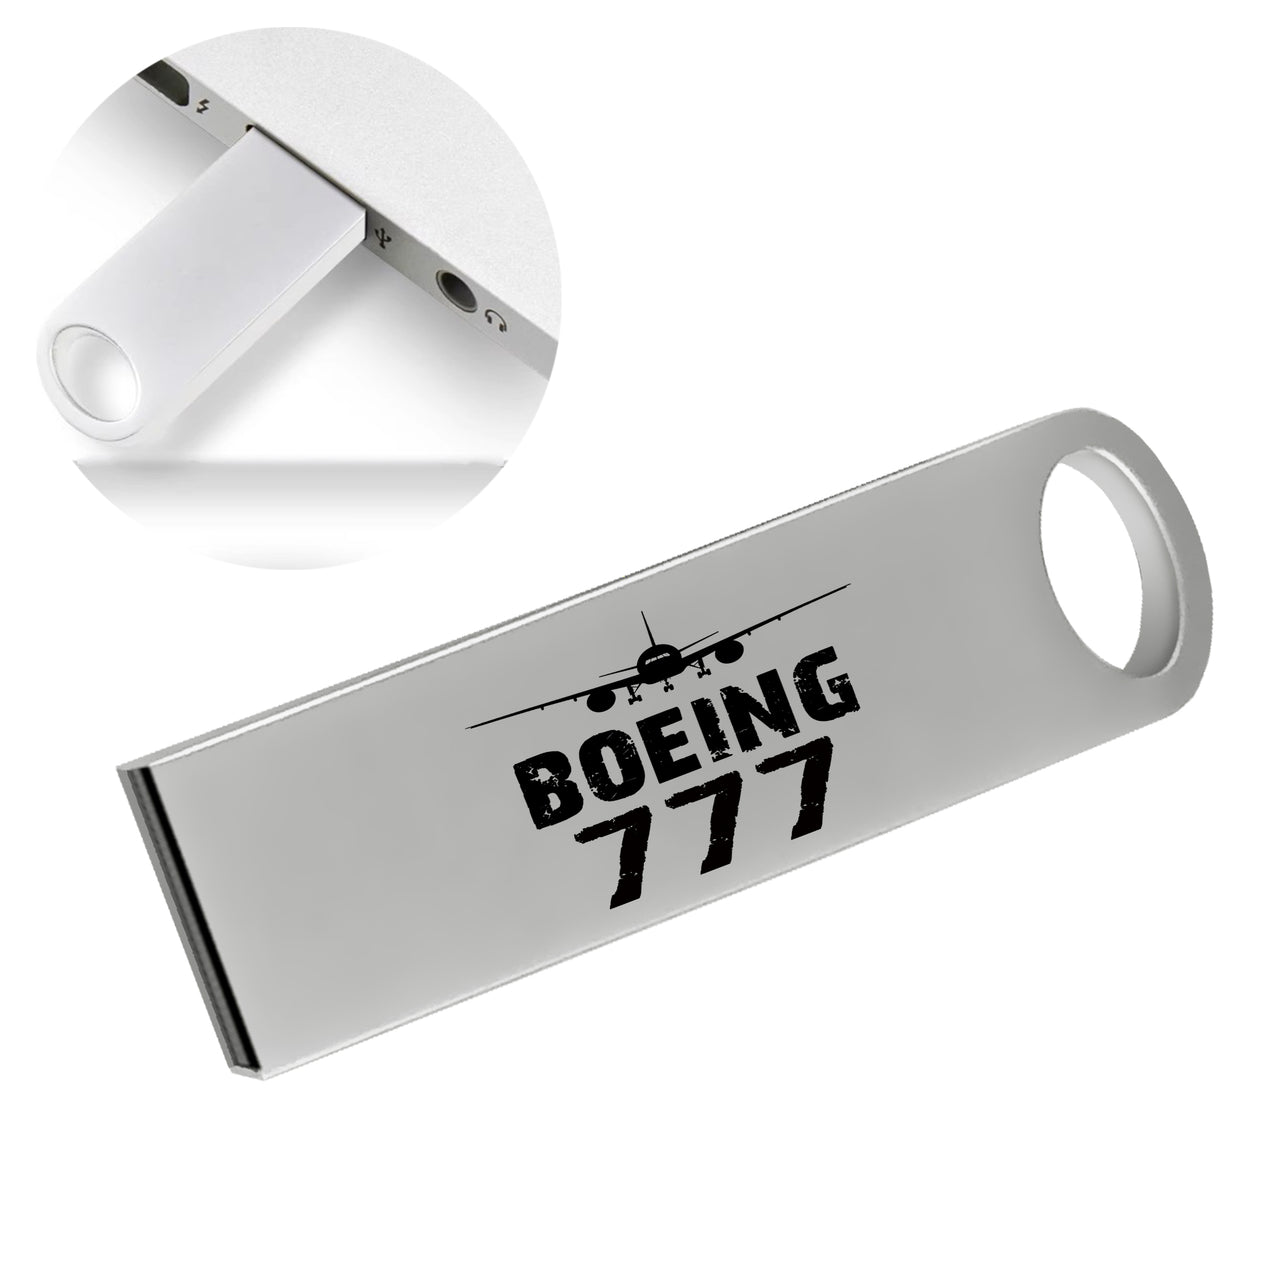 Boeing 777 & Plane Designed Waterproof USB Devices